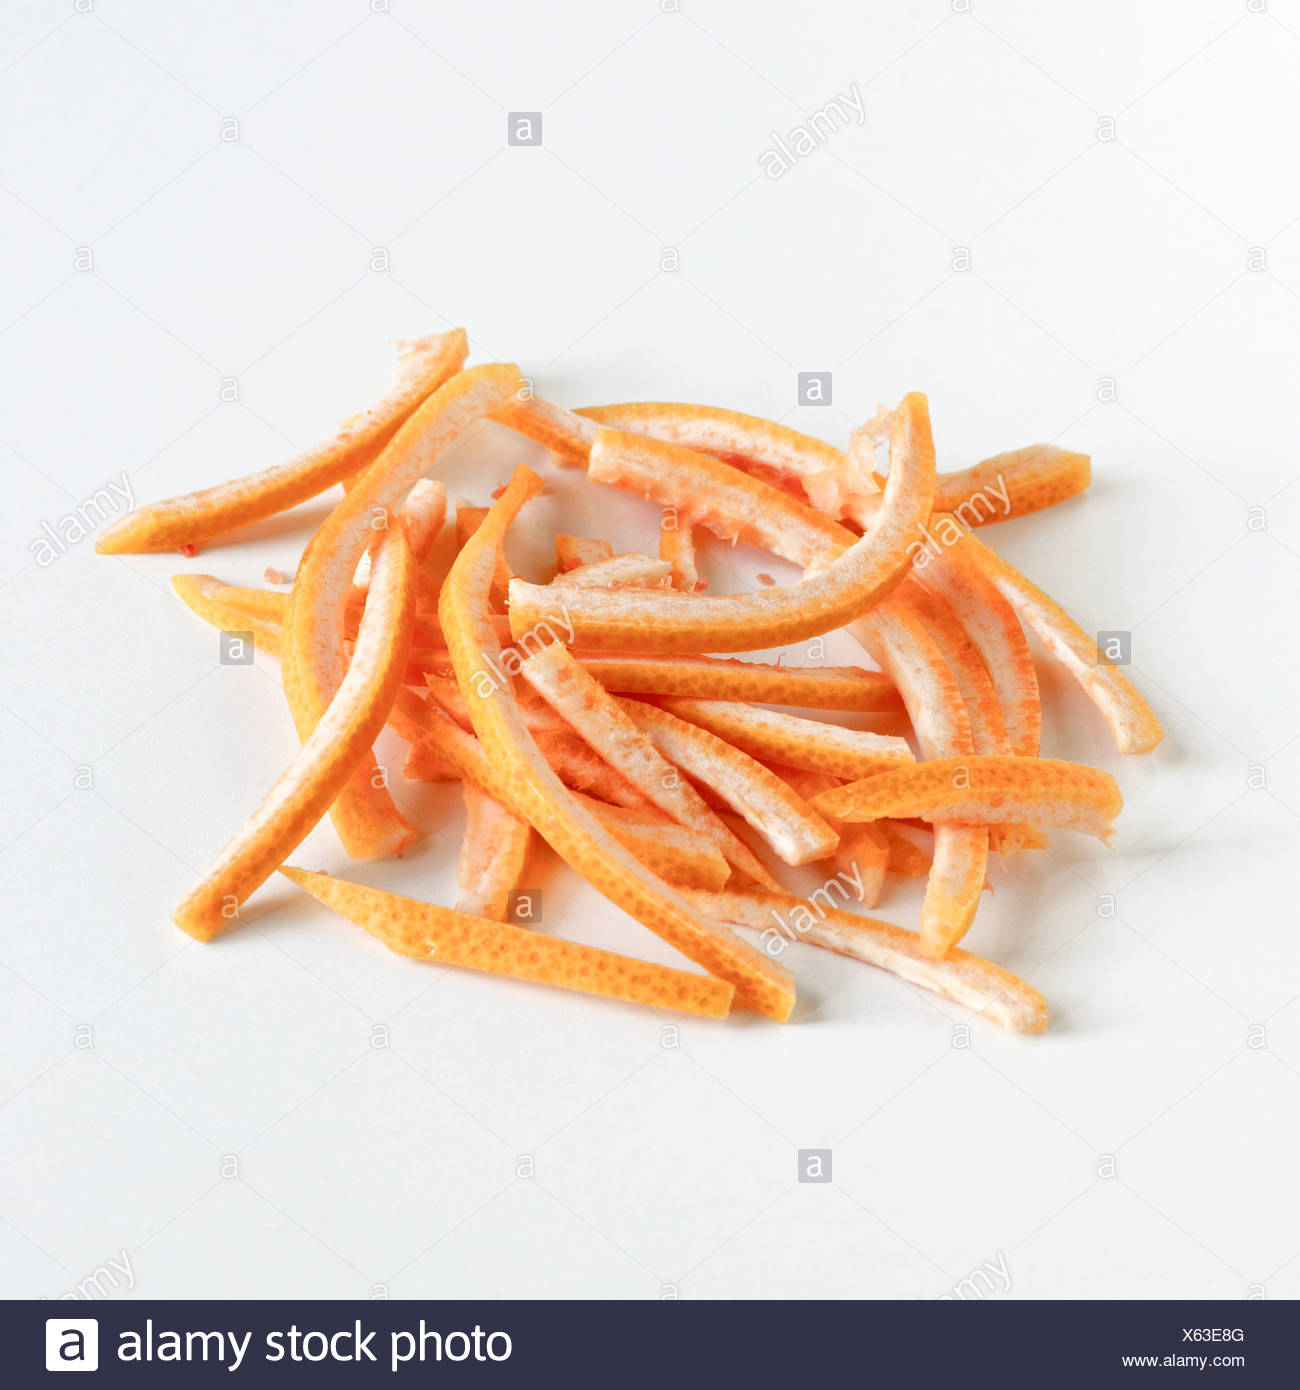 How To's Wiki 88: How To Zest An Orange In Strips